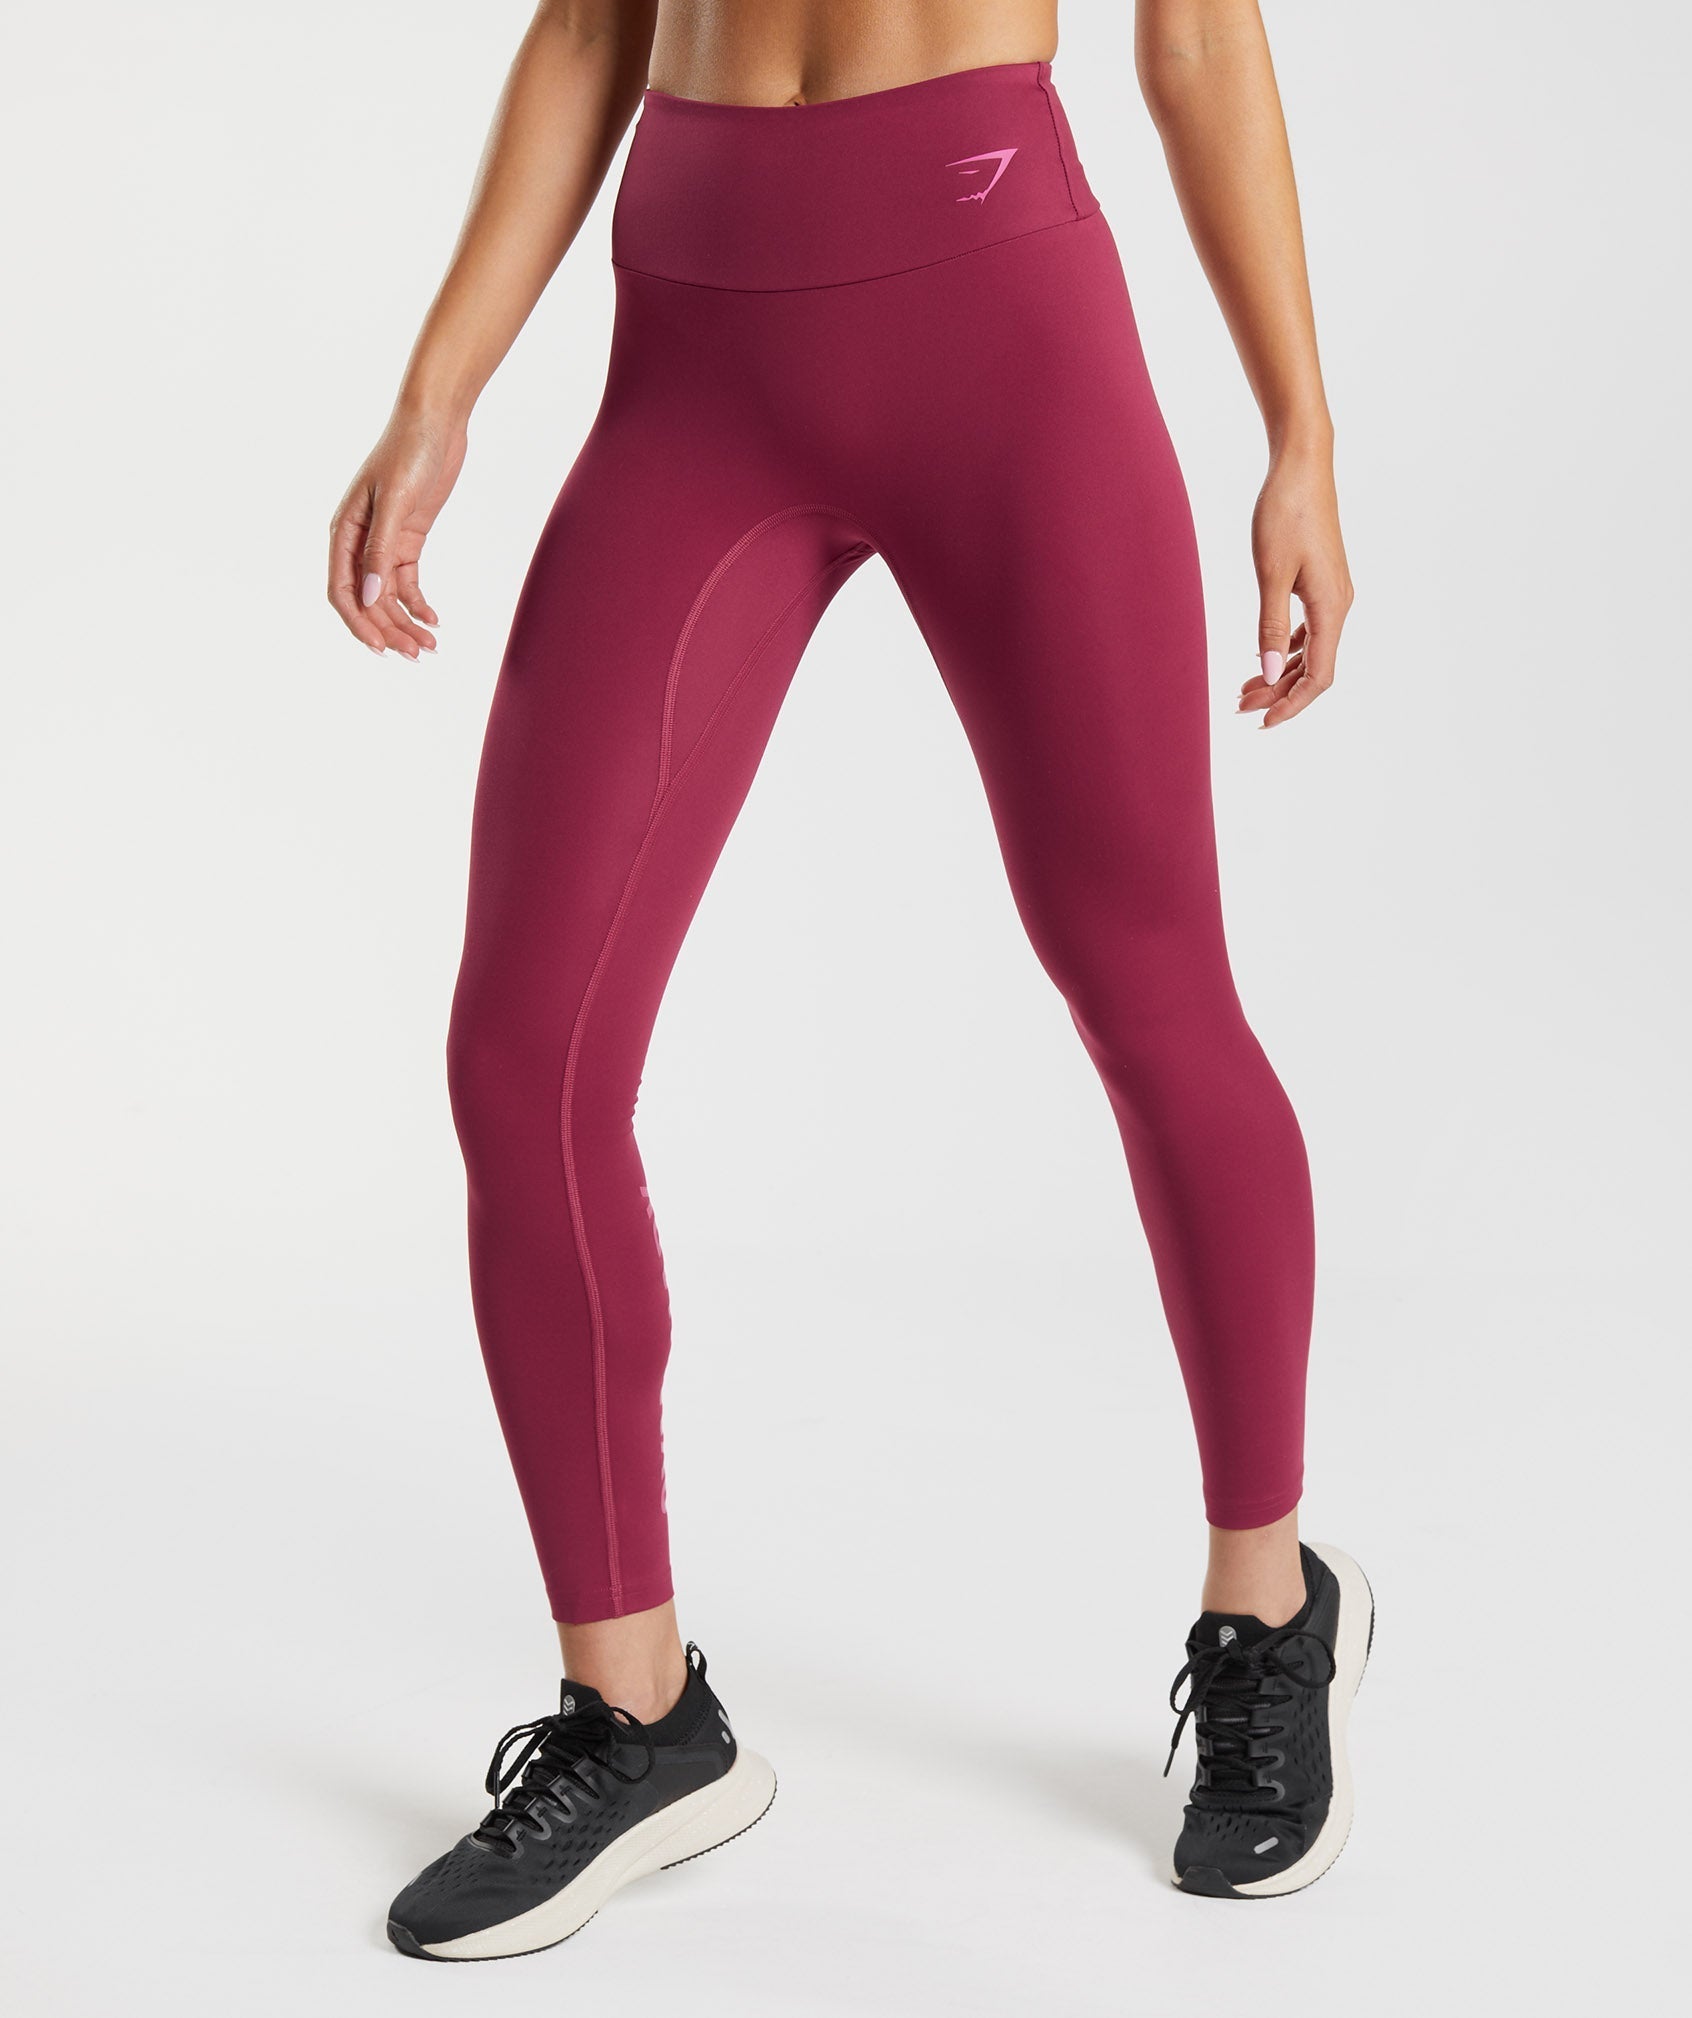 Graphics Fraction Leggings in Currant Pink